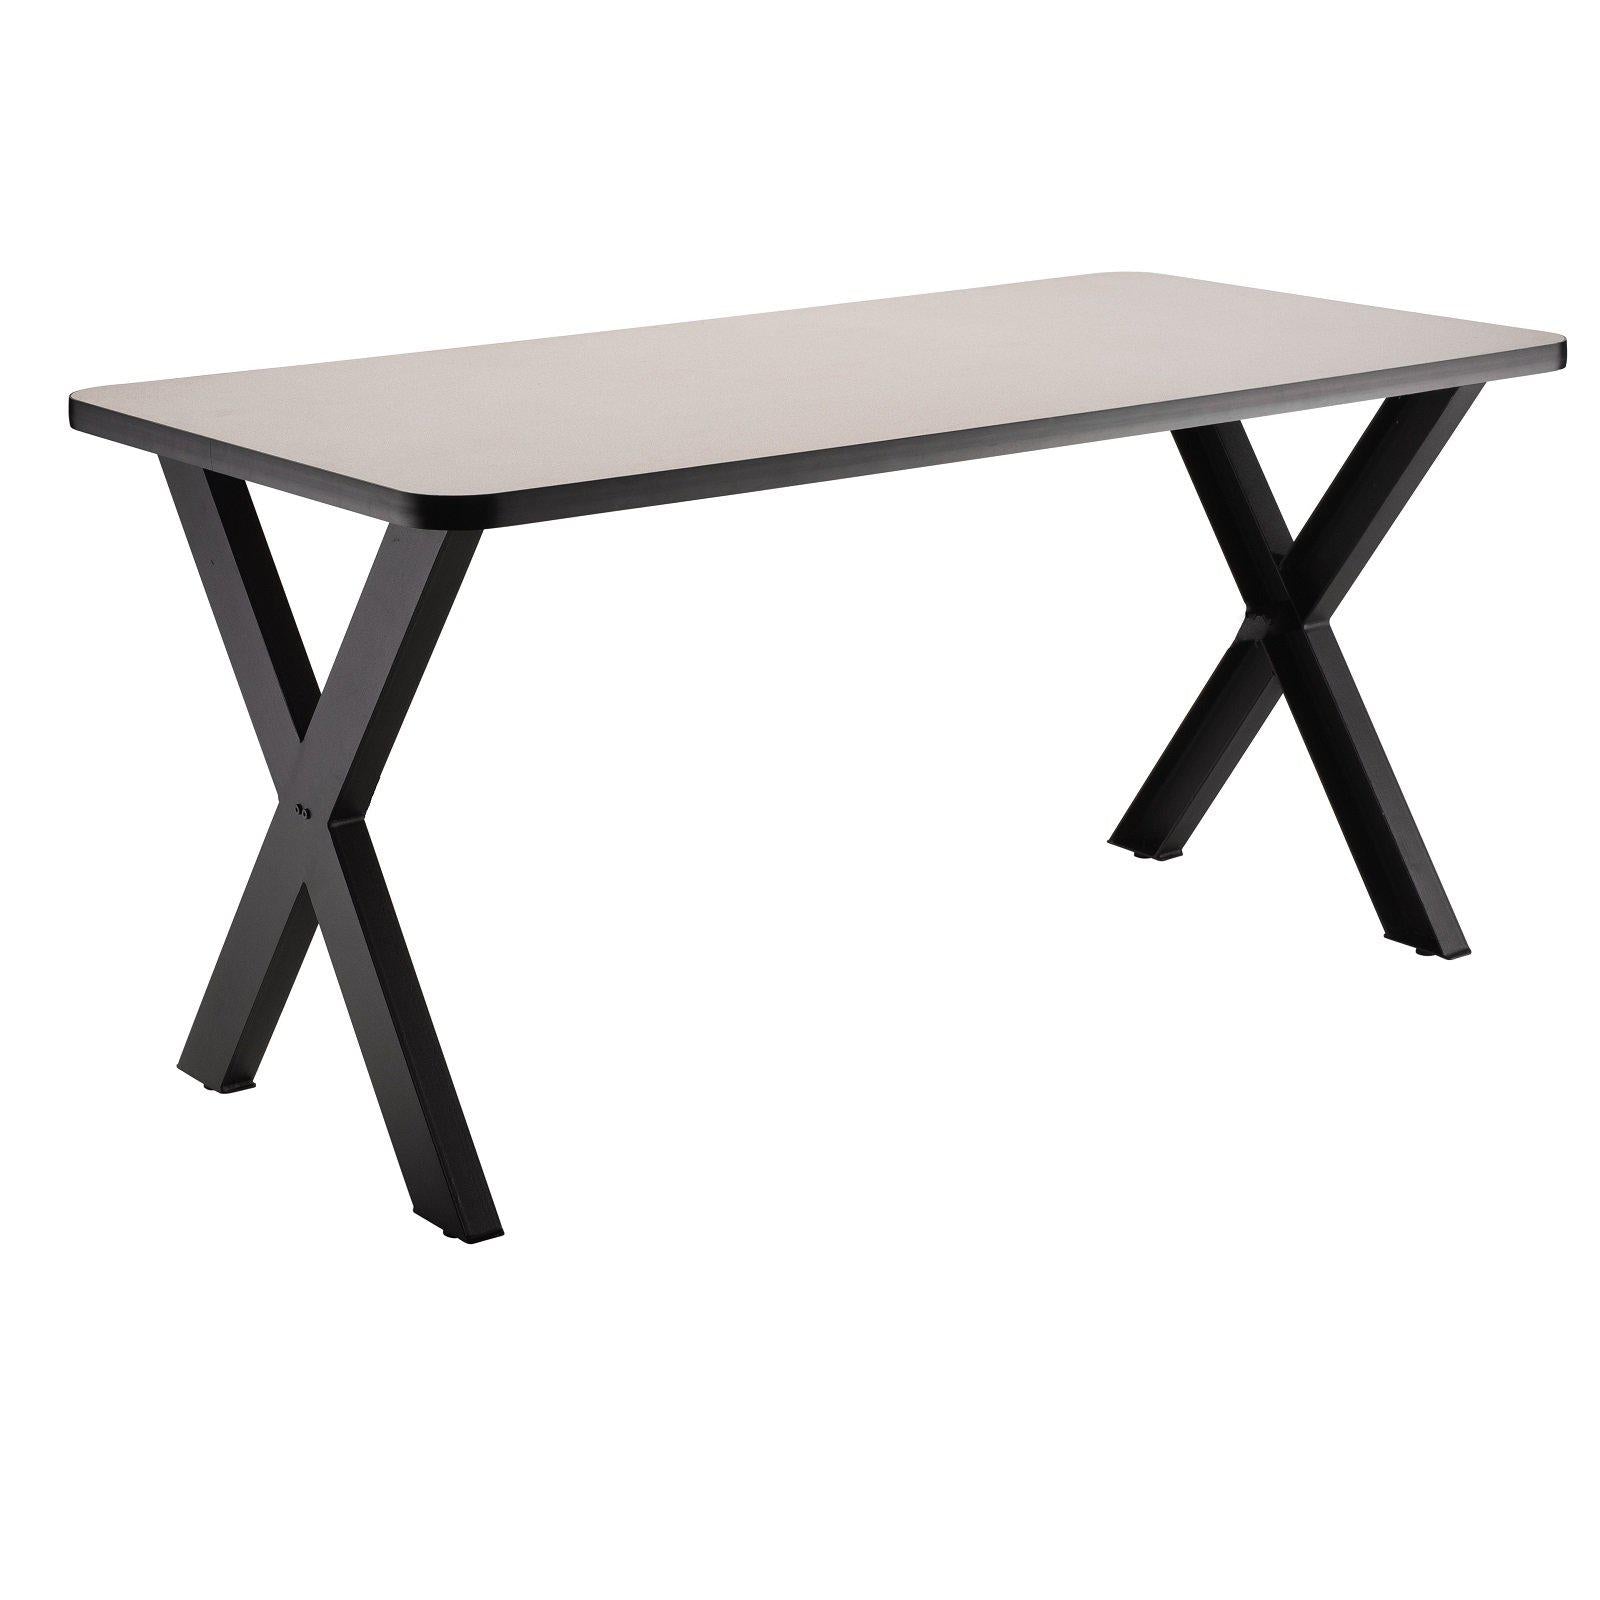 Collaborator Table, 36" x 60", Rectangle, 30" Dining Height, High Pressure Laminate Top, Particleboard Core